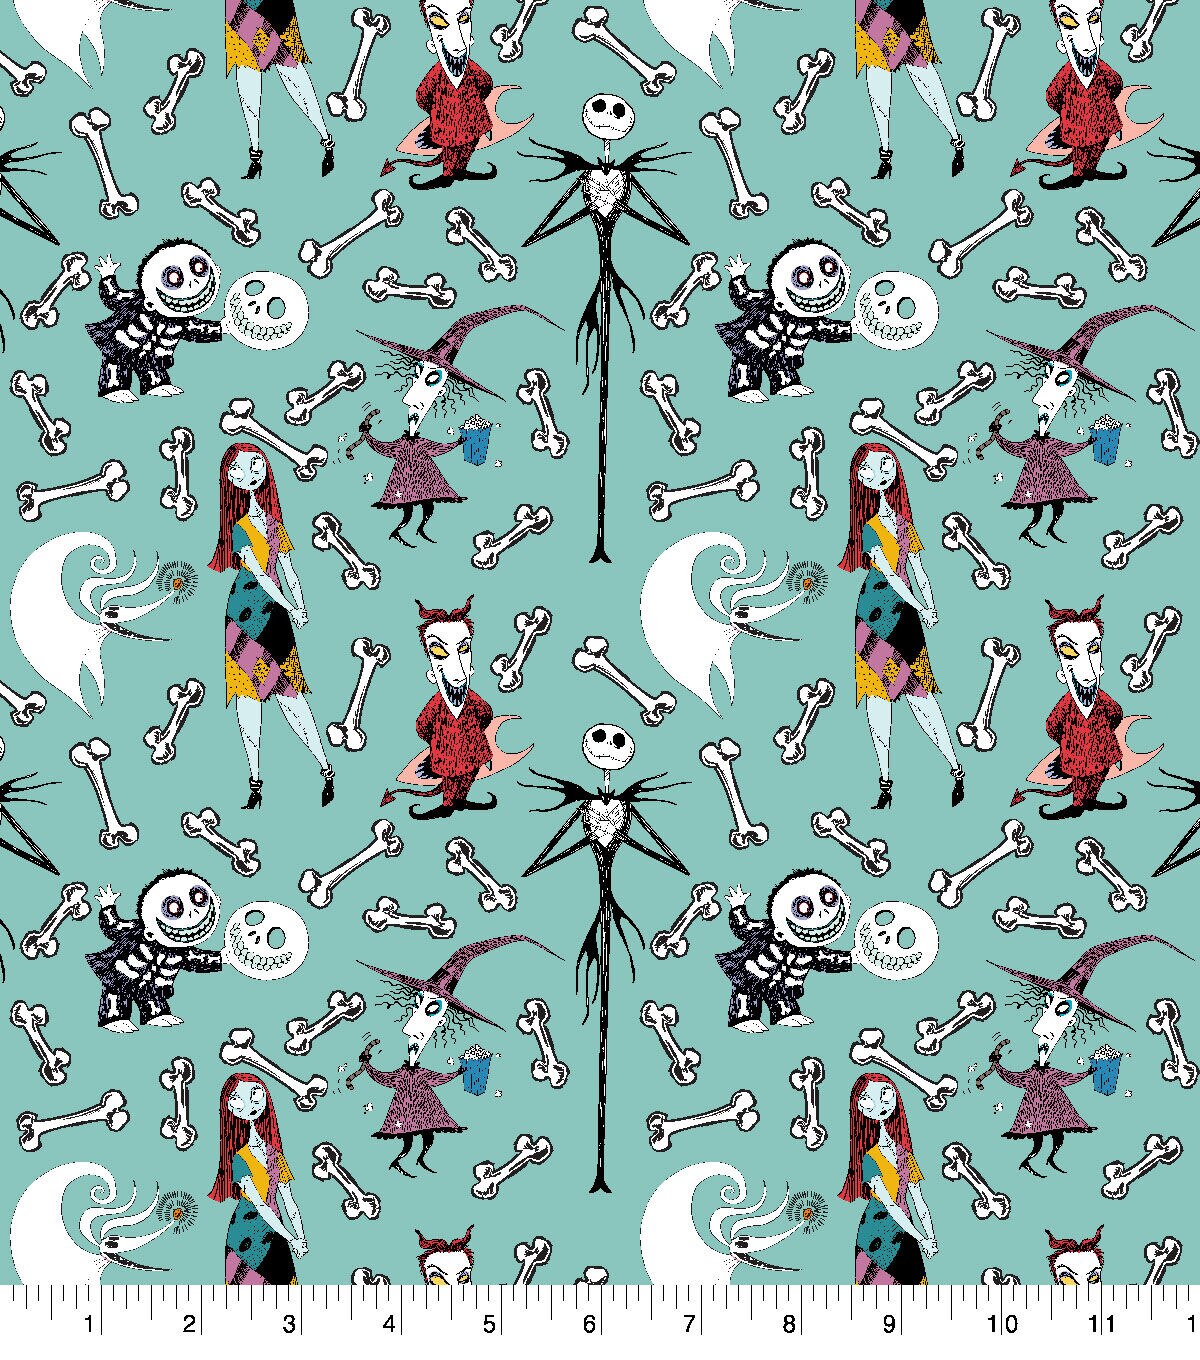 Fabric Nightmare Before Christmas Cotton Quilting Fabric Priced per Yard Tossed 